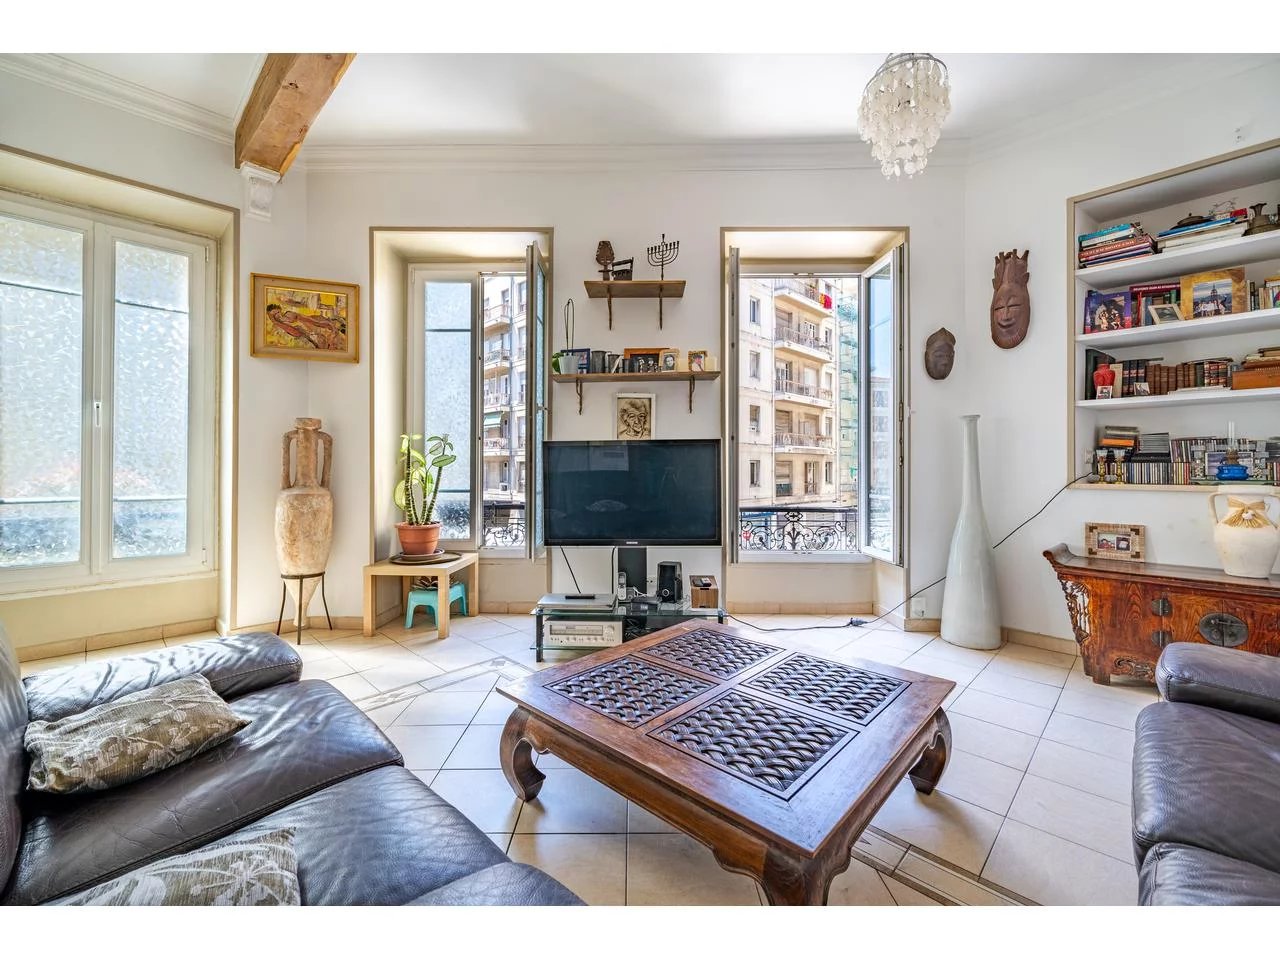 Appartement  5 Rooms 136.55m2  for sale   529 000 €